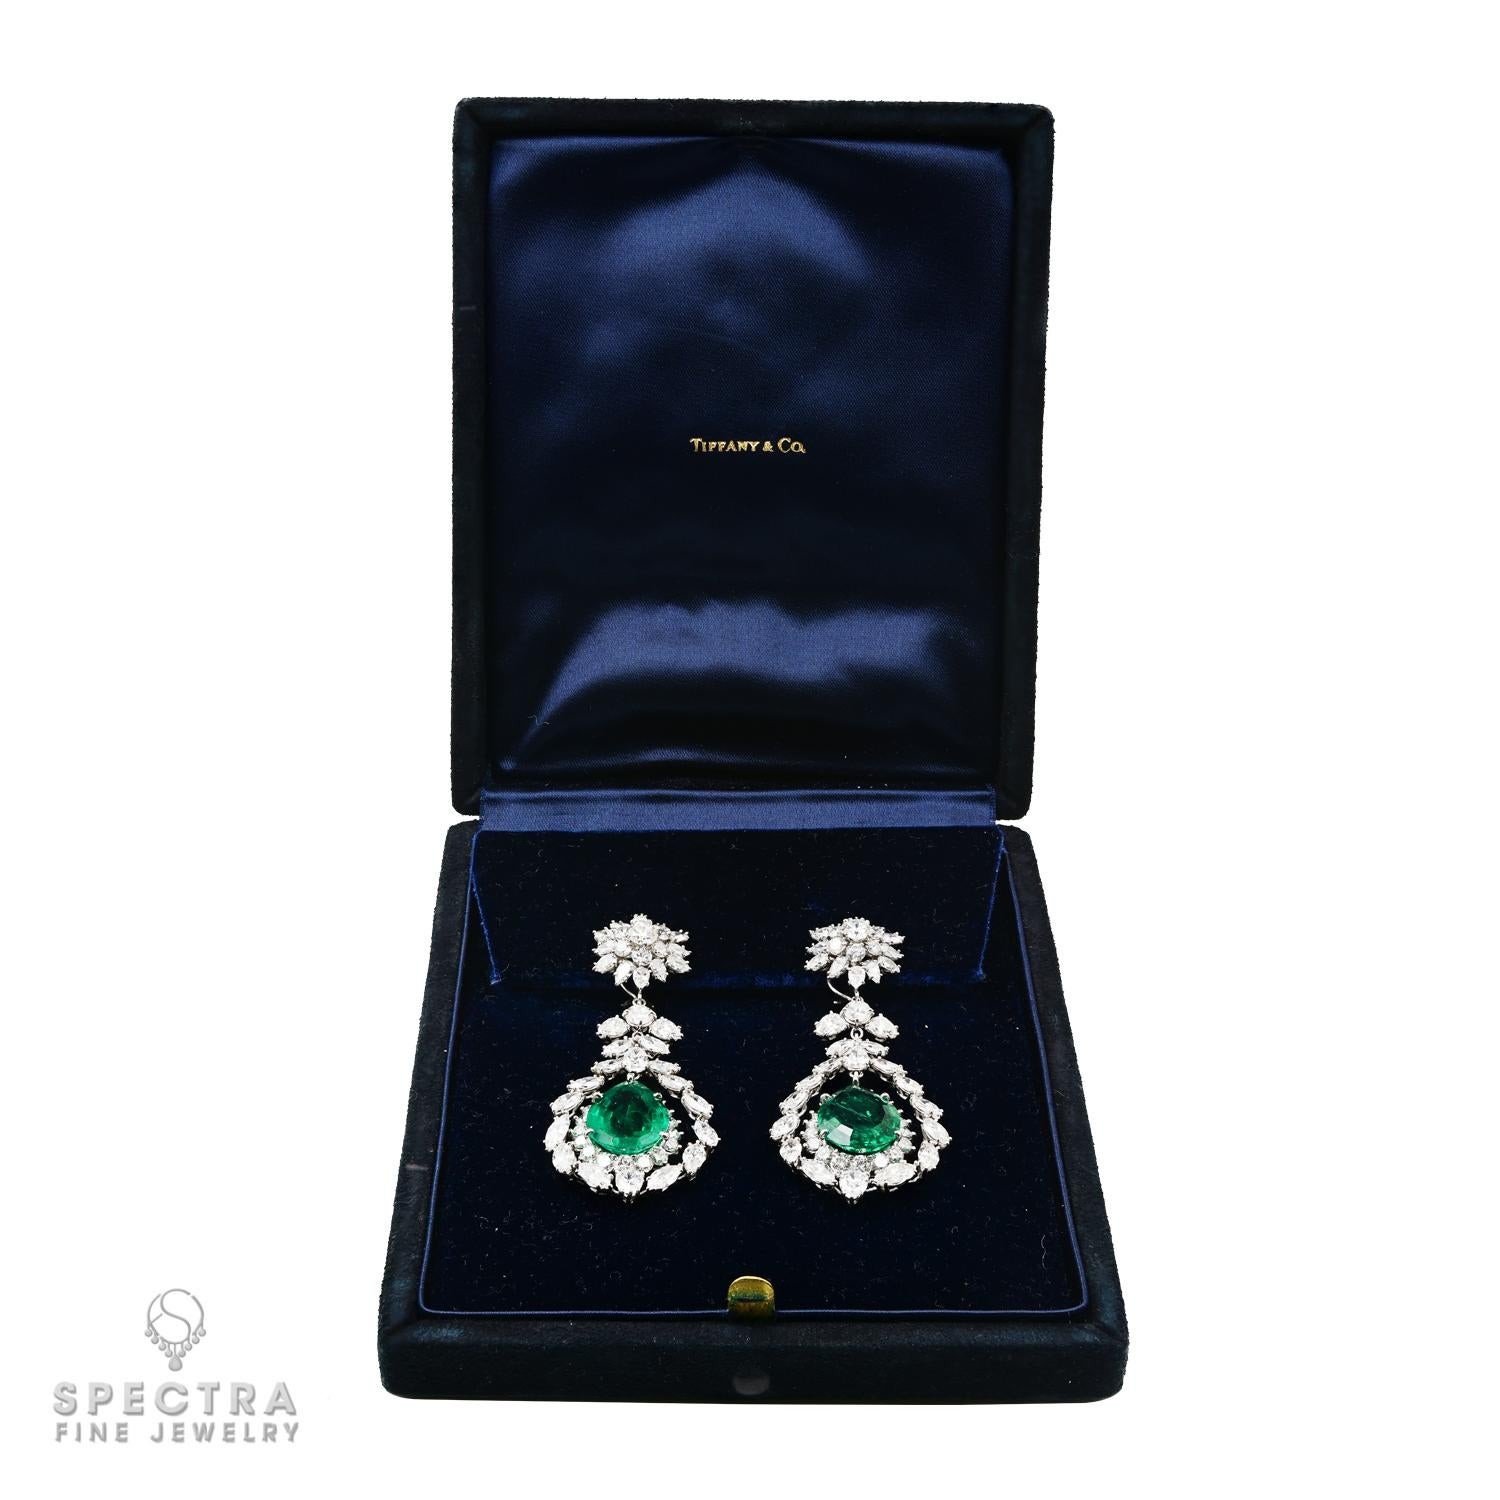 These exquisite drop earrings from Tiffany & Co. are a captivating masterpiece adorned with the rare beauty of Colombian emeralds and dazzling diamonds.

At the heart of each earring sits a resplendent pear-shaped Colombian emerald, weighing 8.58